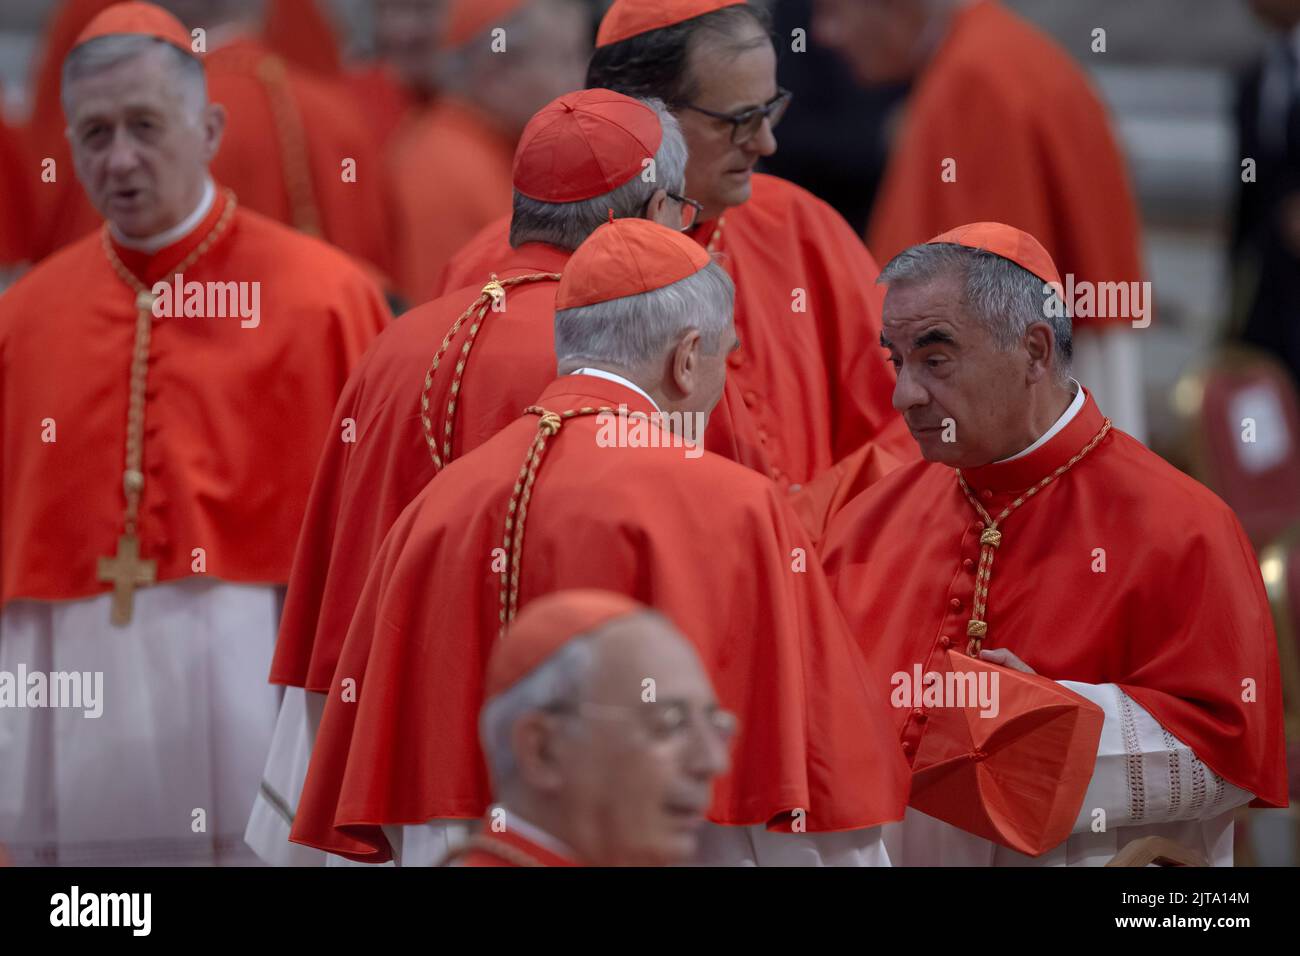 Vatican City, Vatican, 27 August 2022.  Cardinal Angelo Becciu during a consistory ceremony in the Saint Peter's Basilica. Pope Francis creates 20 new cardinals at his eighth Consistory. Credit: Maria Grazia Picciarella/Alamy Live News Stock Photo